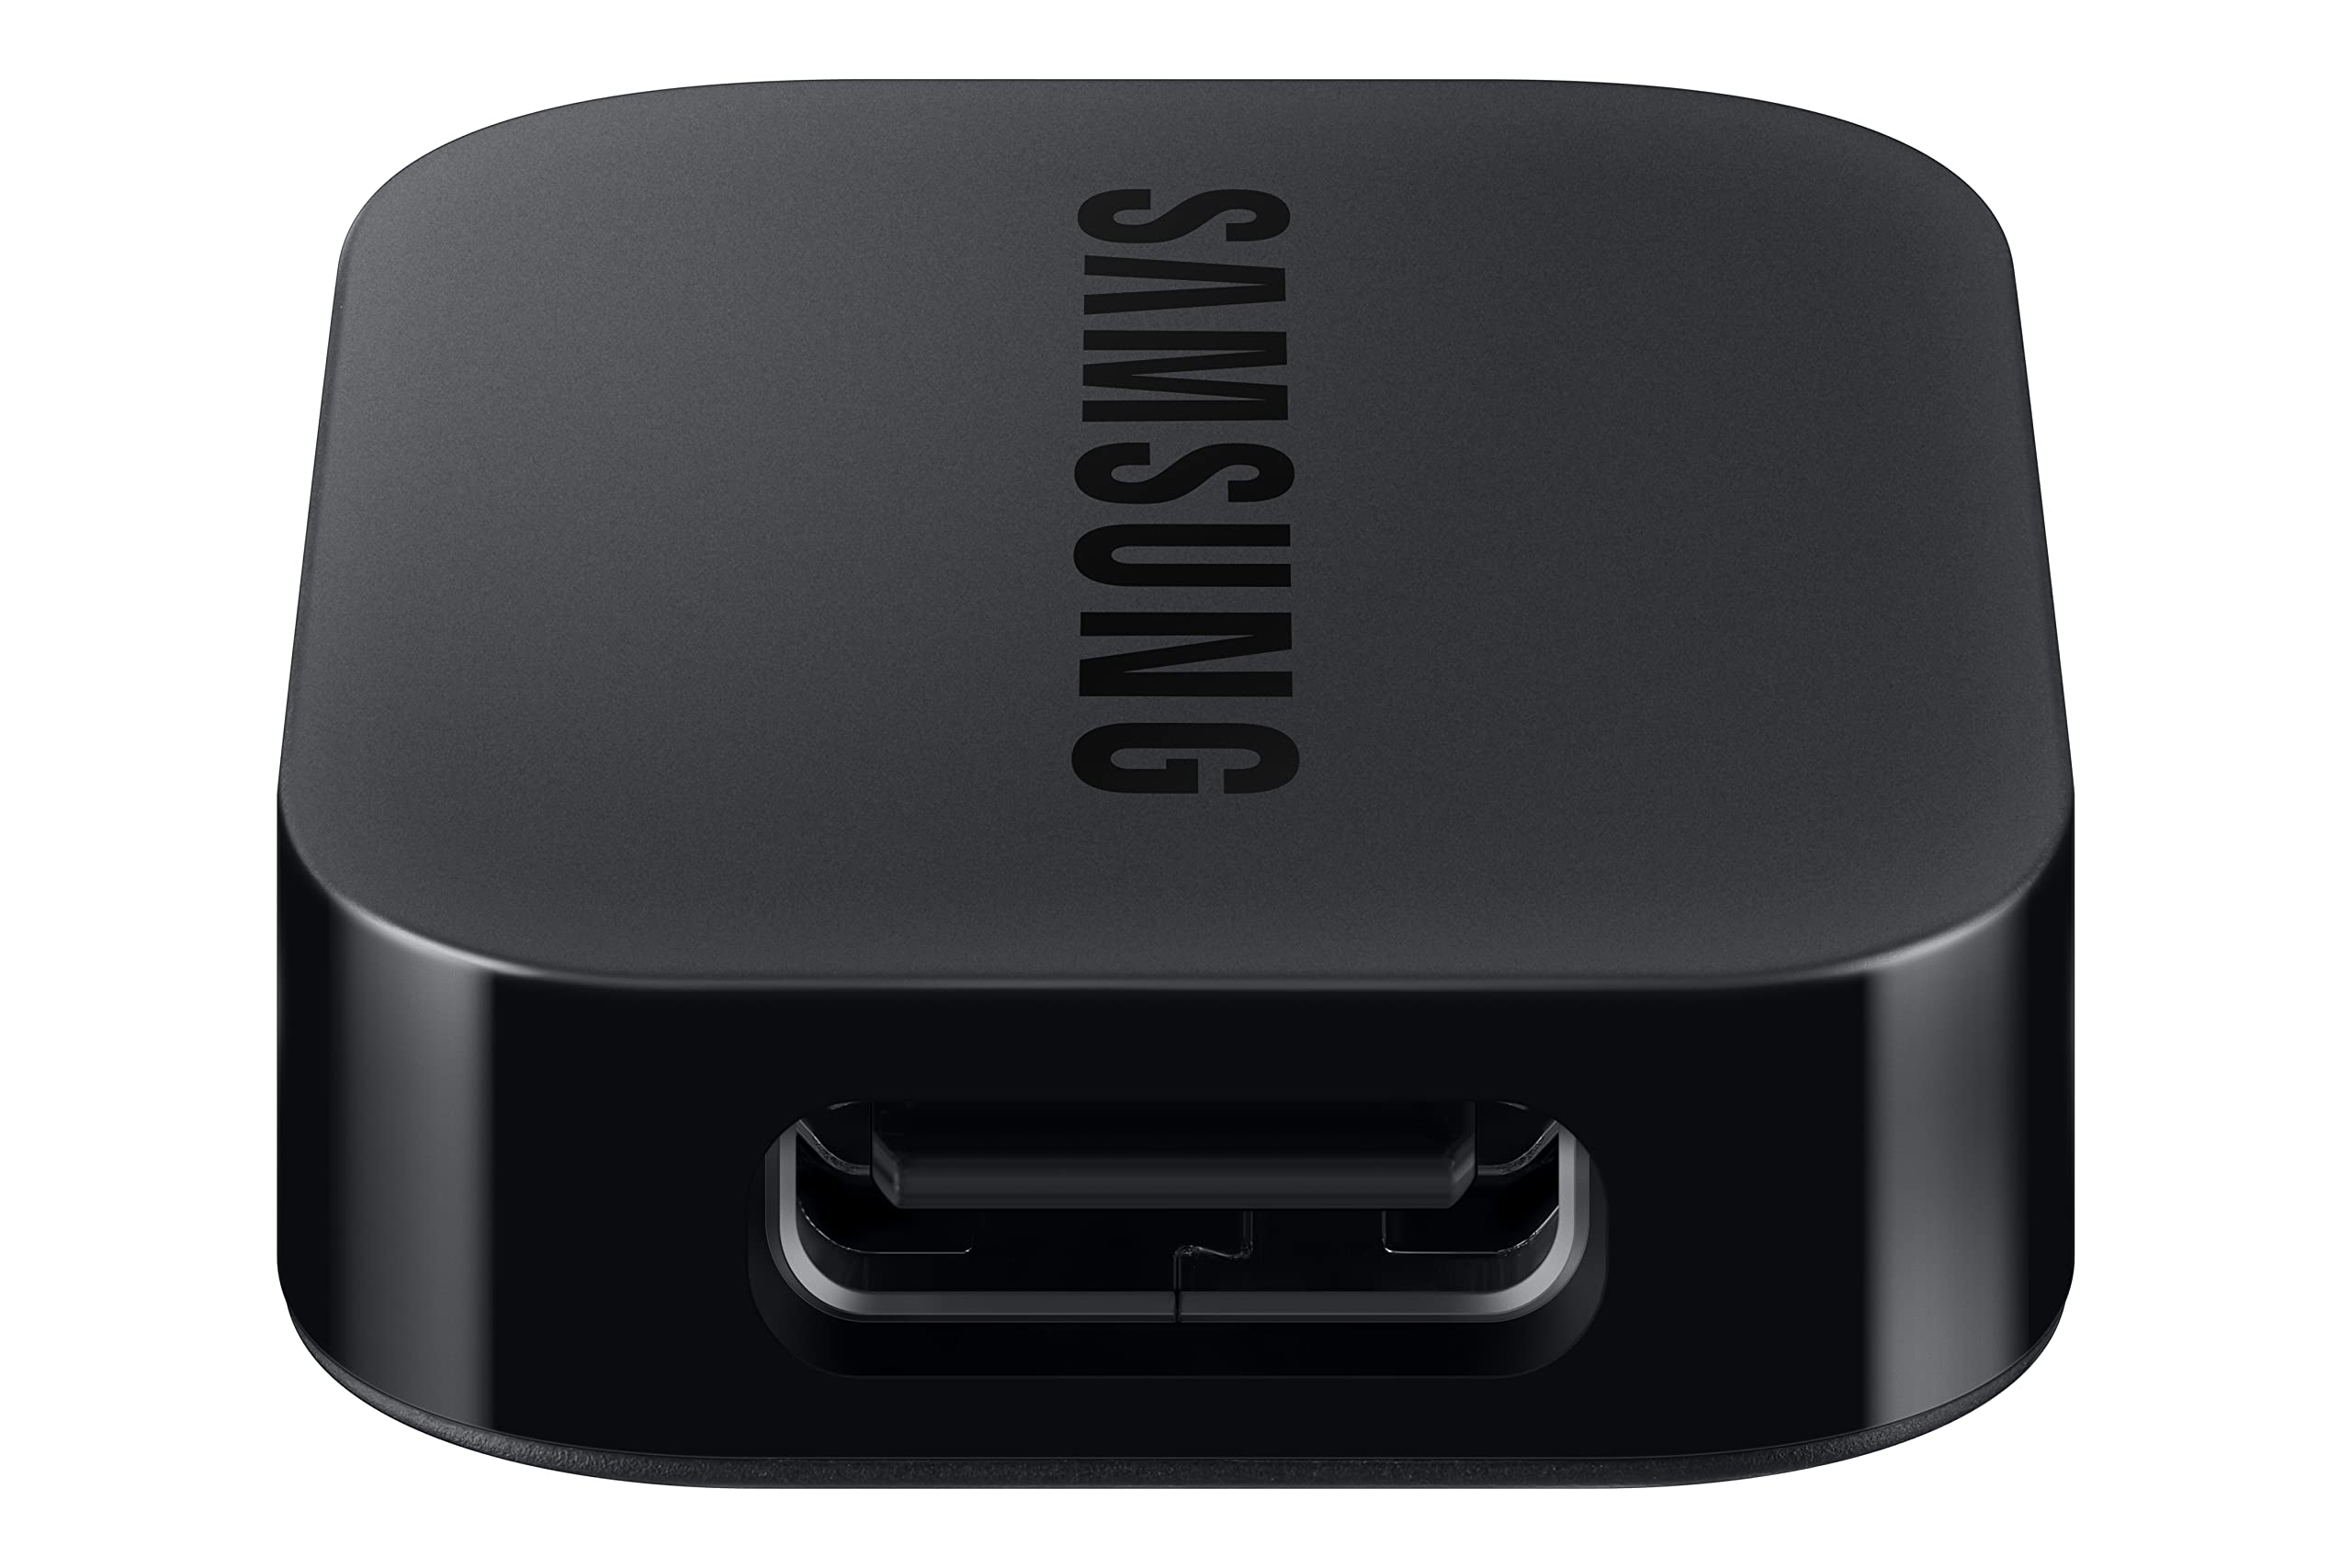 SAMSUNG SmartThings Hub Dongle for Zigbee Devices; USB Cable Included, Easy Installation (VG-STDB10A/ZA, 2022)